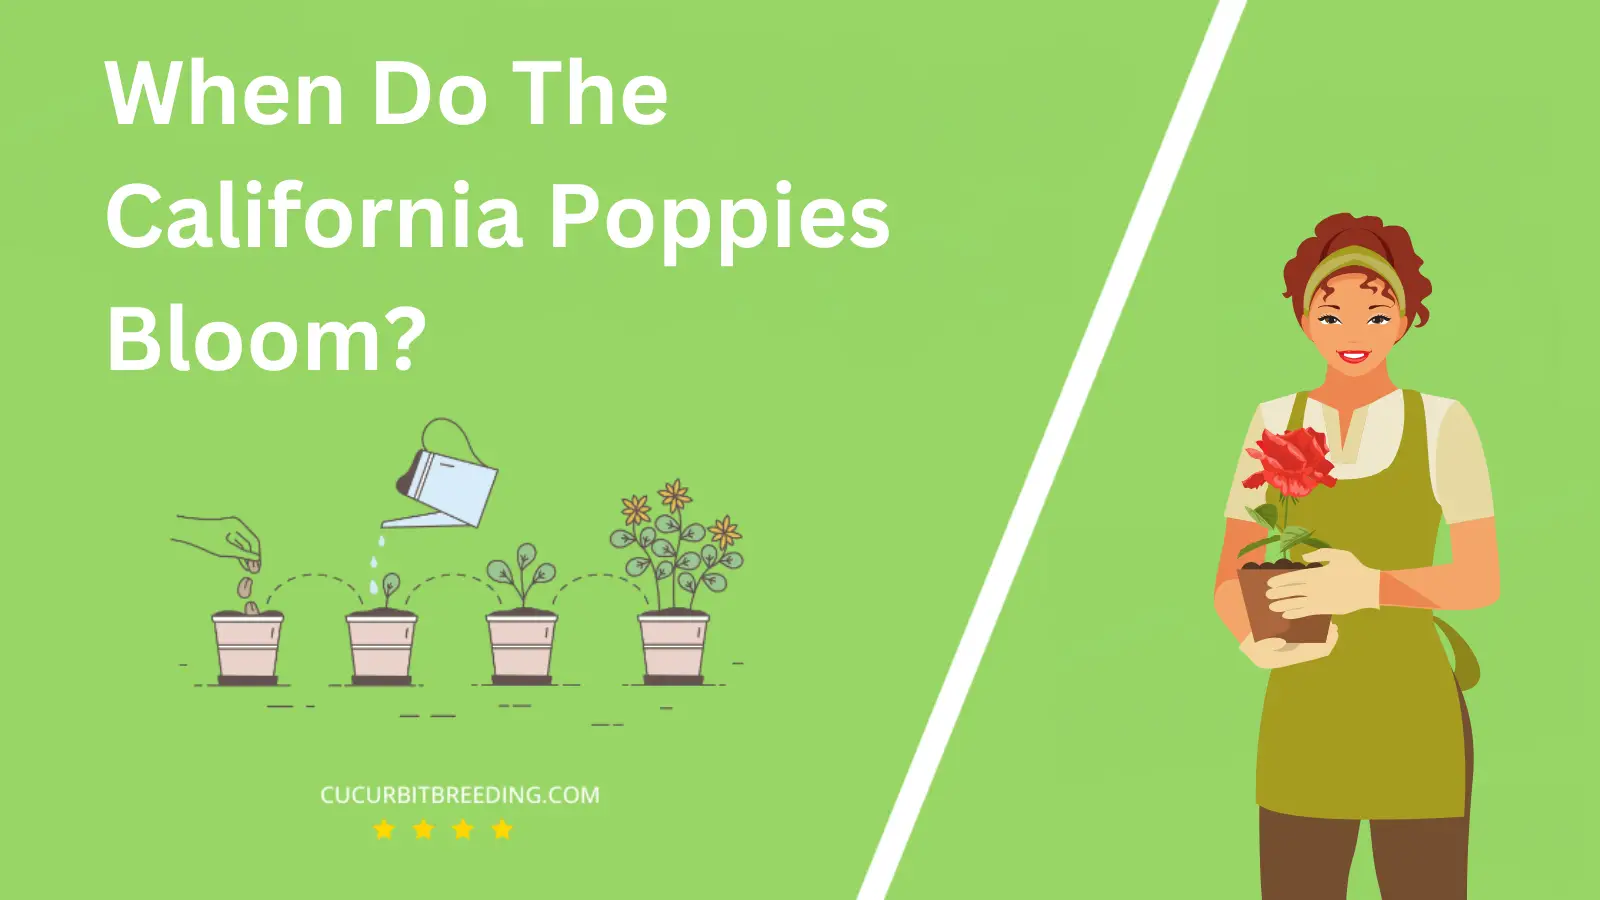 When Do The California Poppies Bloom?